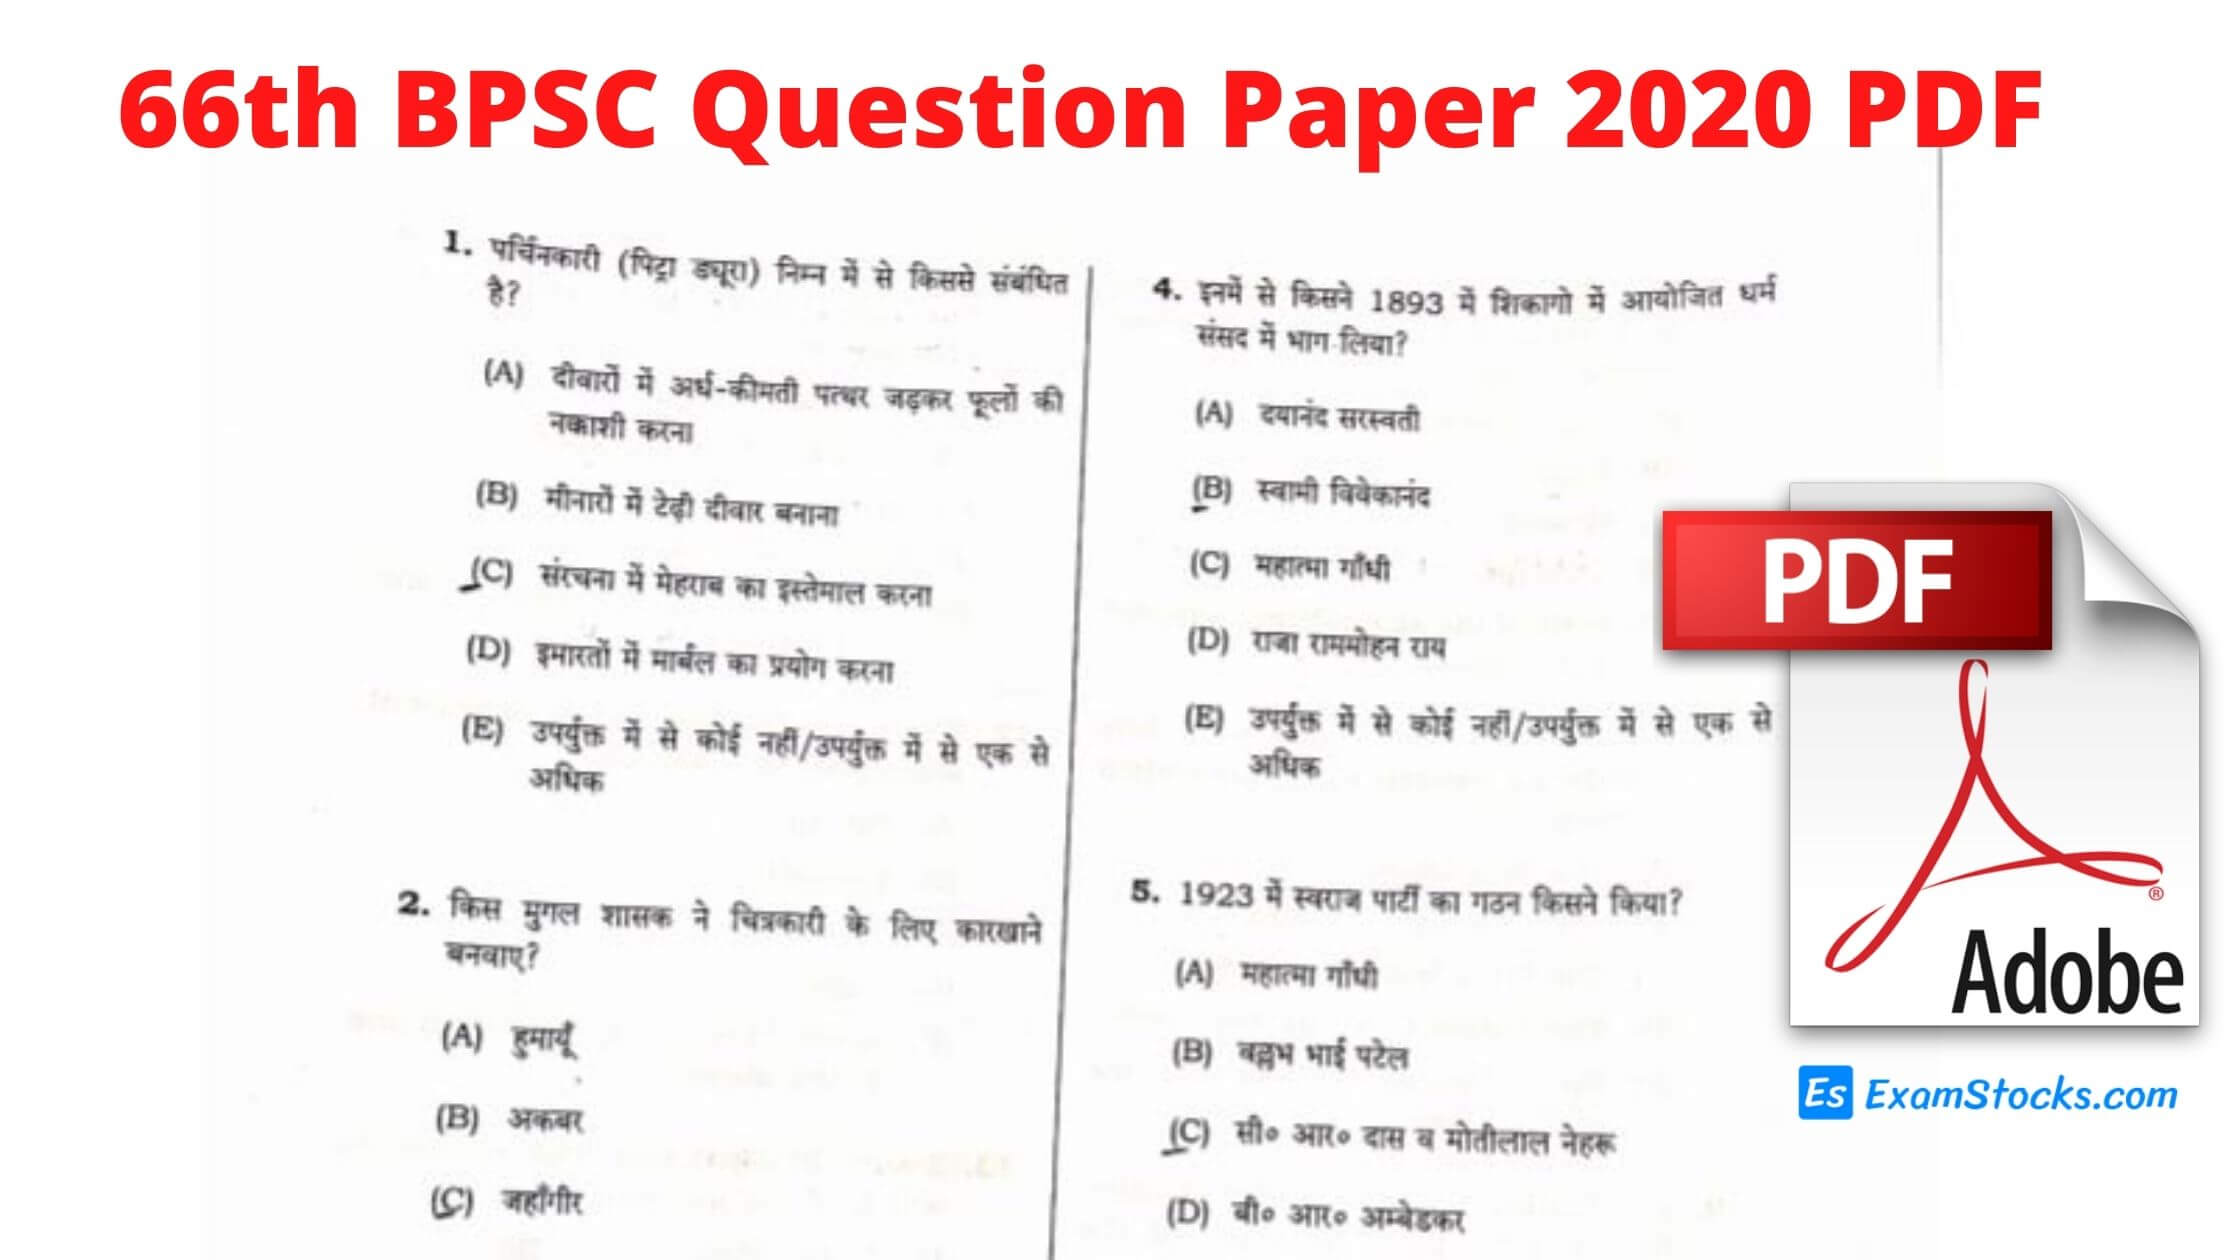 66th BPSC Question Paper 2020 PDF & Answer Key Download